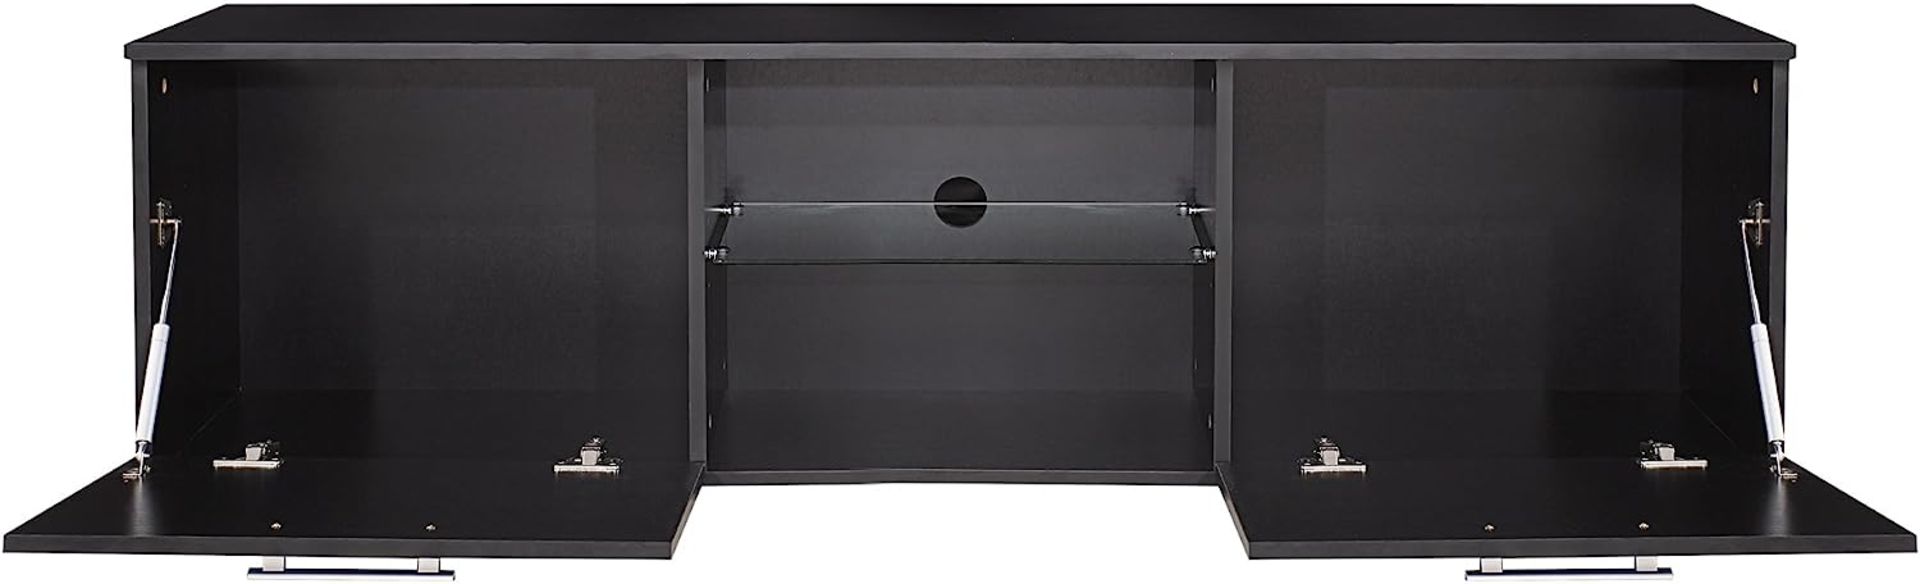 HARMIN MODERN 160CM TV STAND CABINET UNIT WITH HIGH GLOSS DOORS (BLACK ON BLACK) - Image 5 of 9